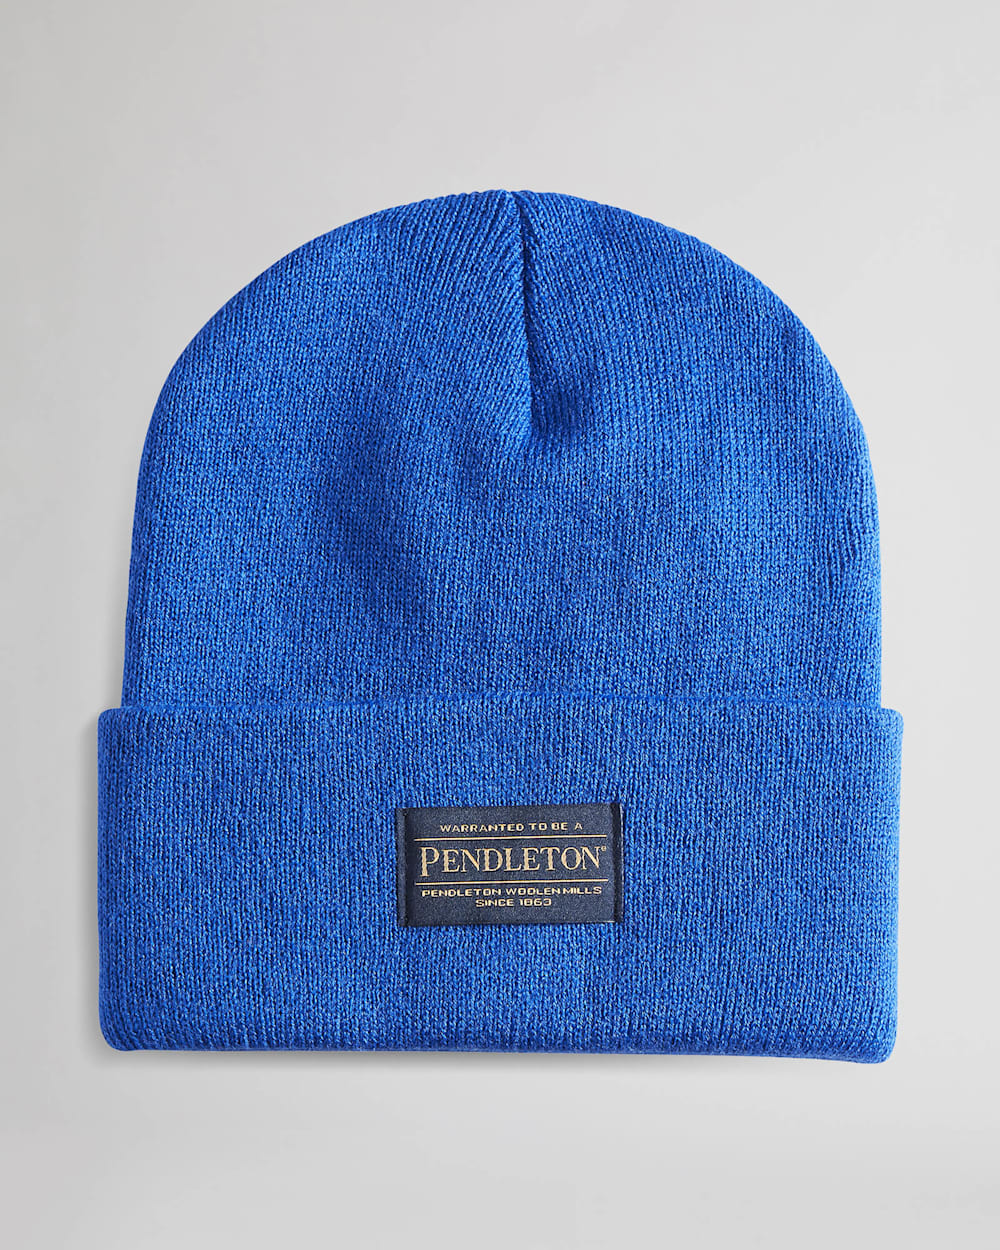 PENDLETON BEANIE IN ELECTRIC BLUE image number 1